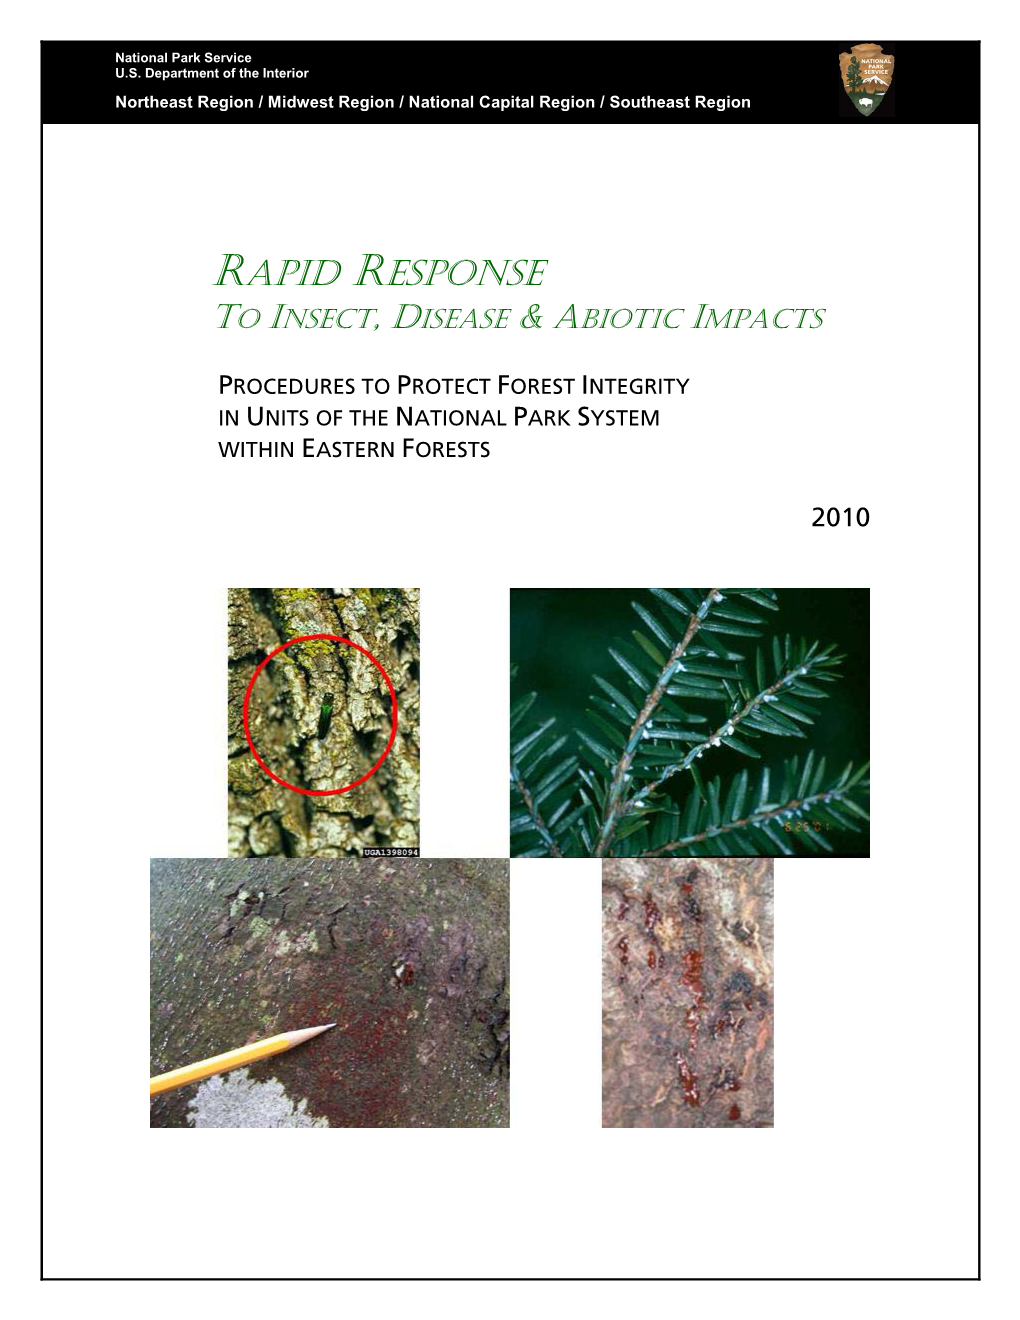 Forest Insect and Disease Rapid Response Plan